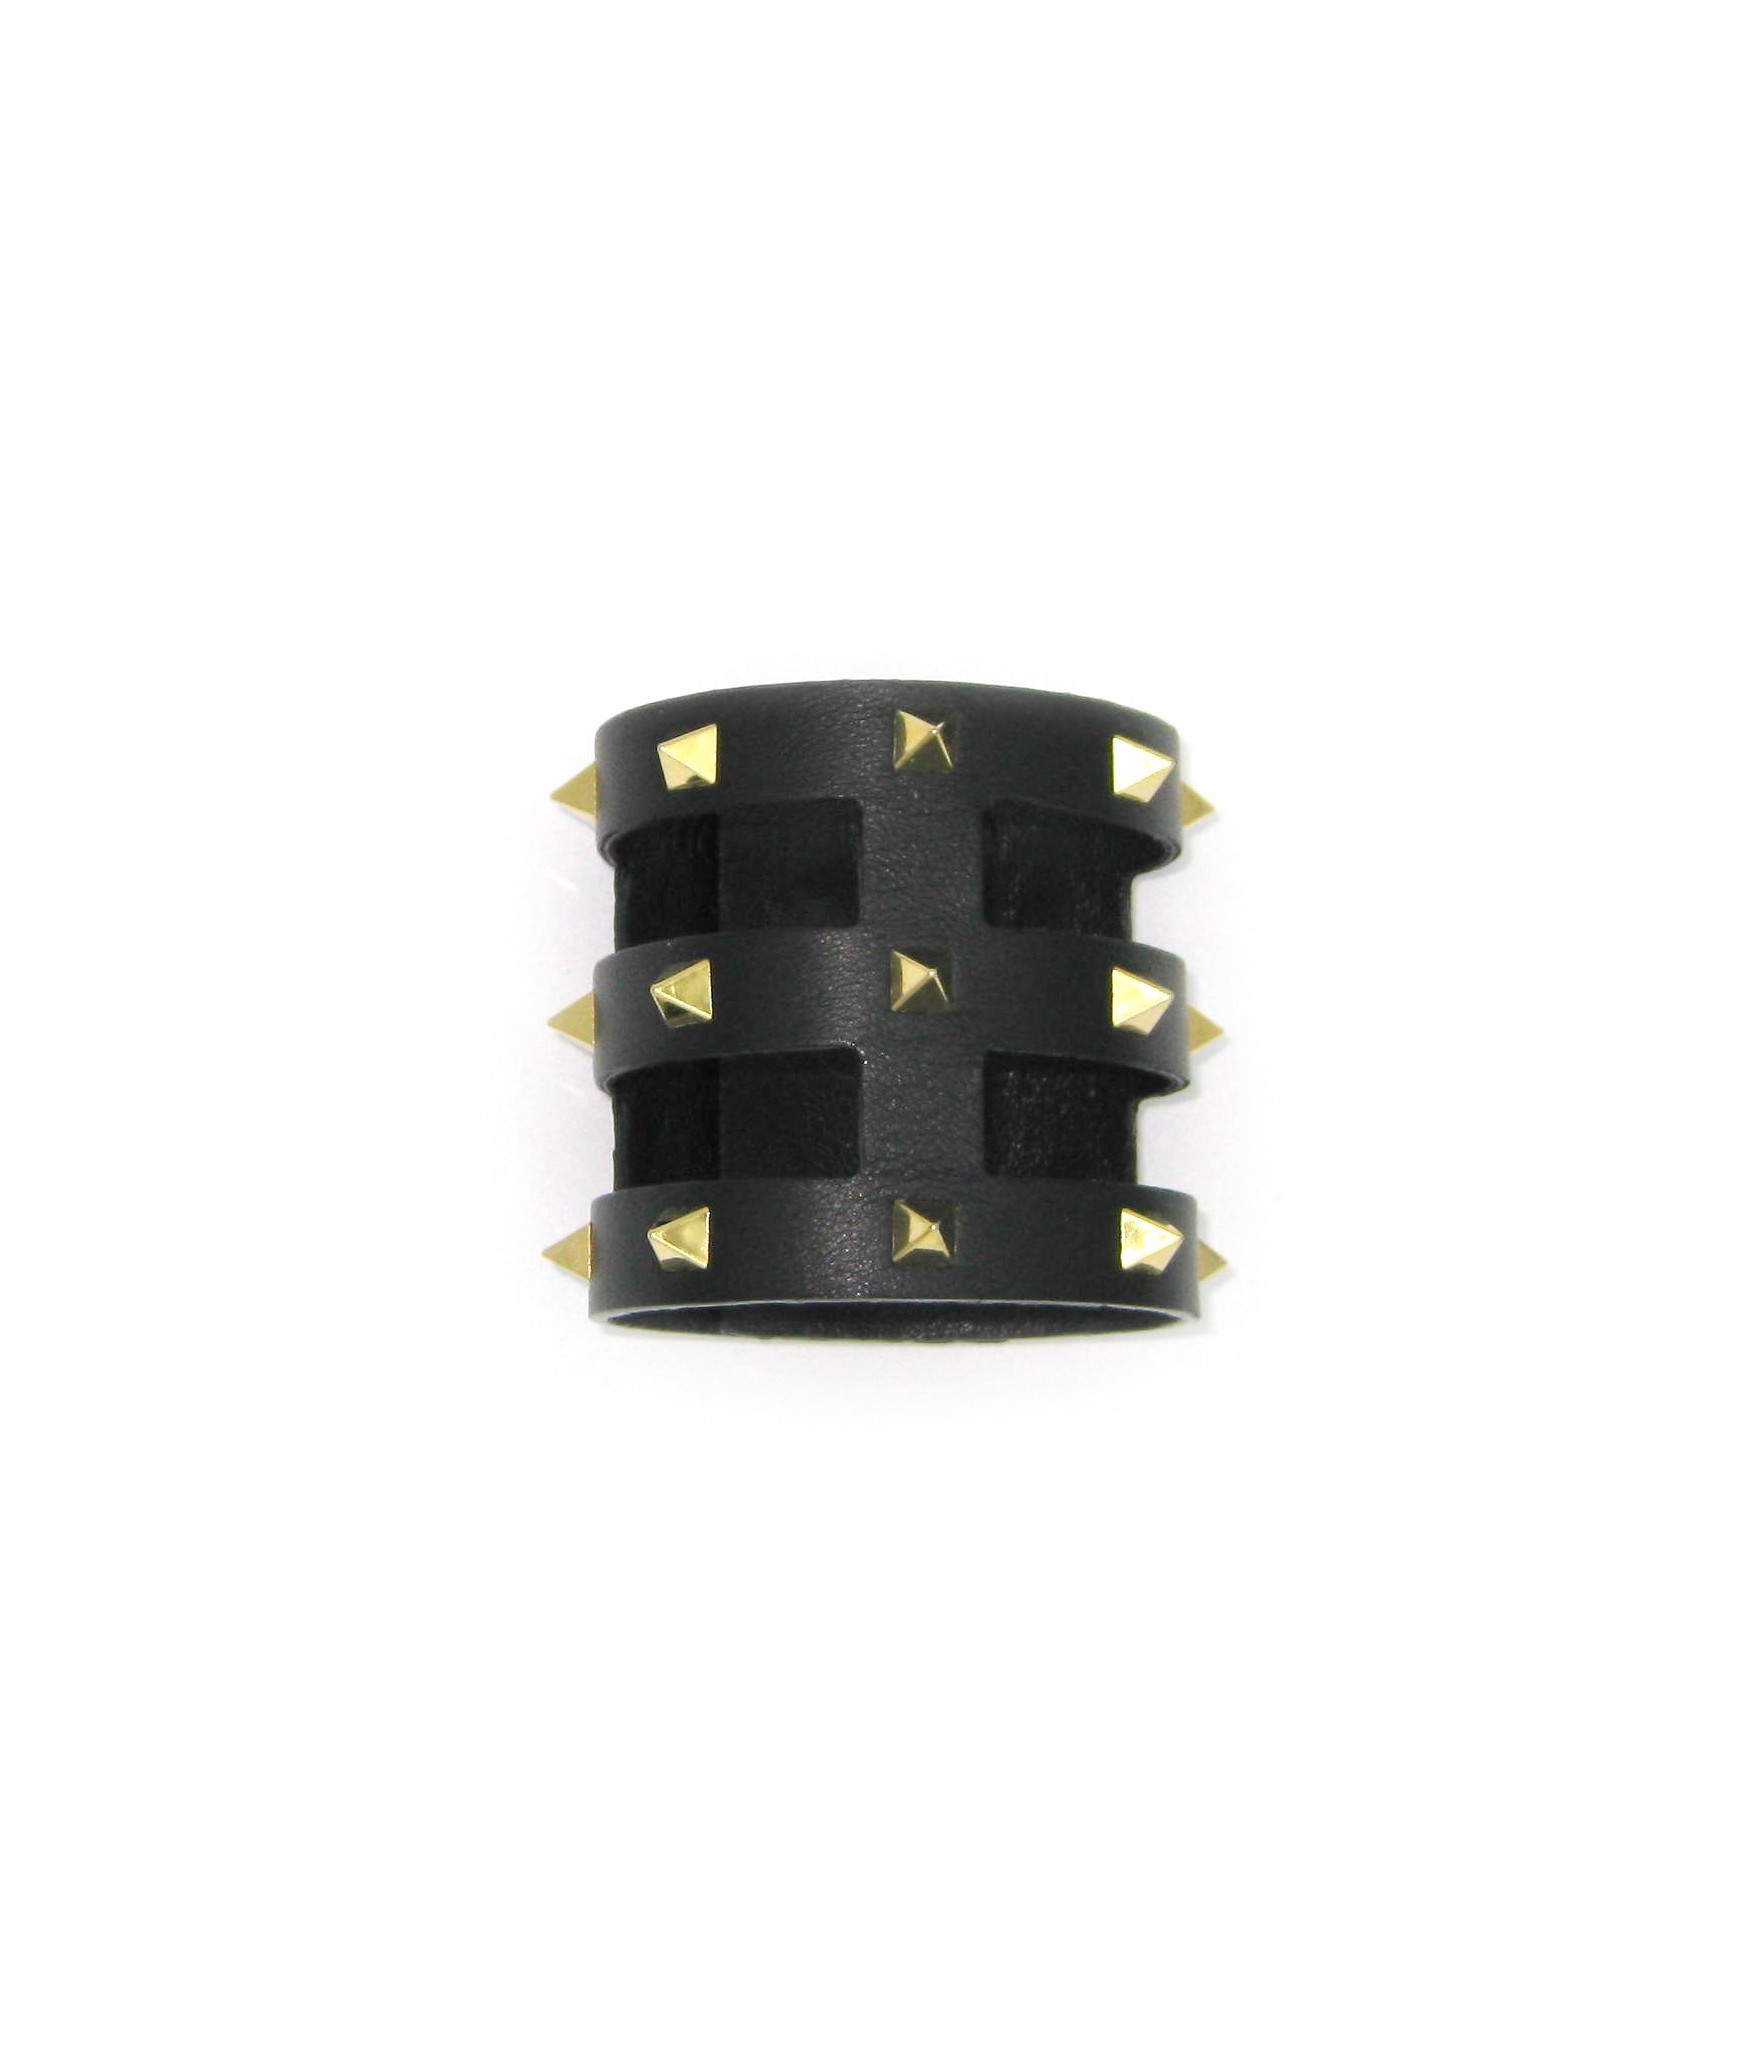 Accessories Woman Bracelet Cage bracelet in Nappa leather with